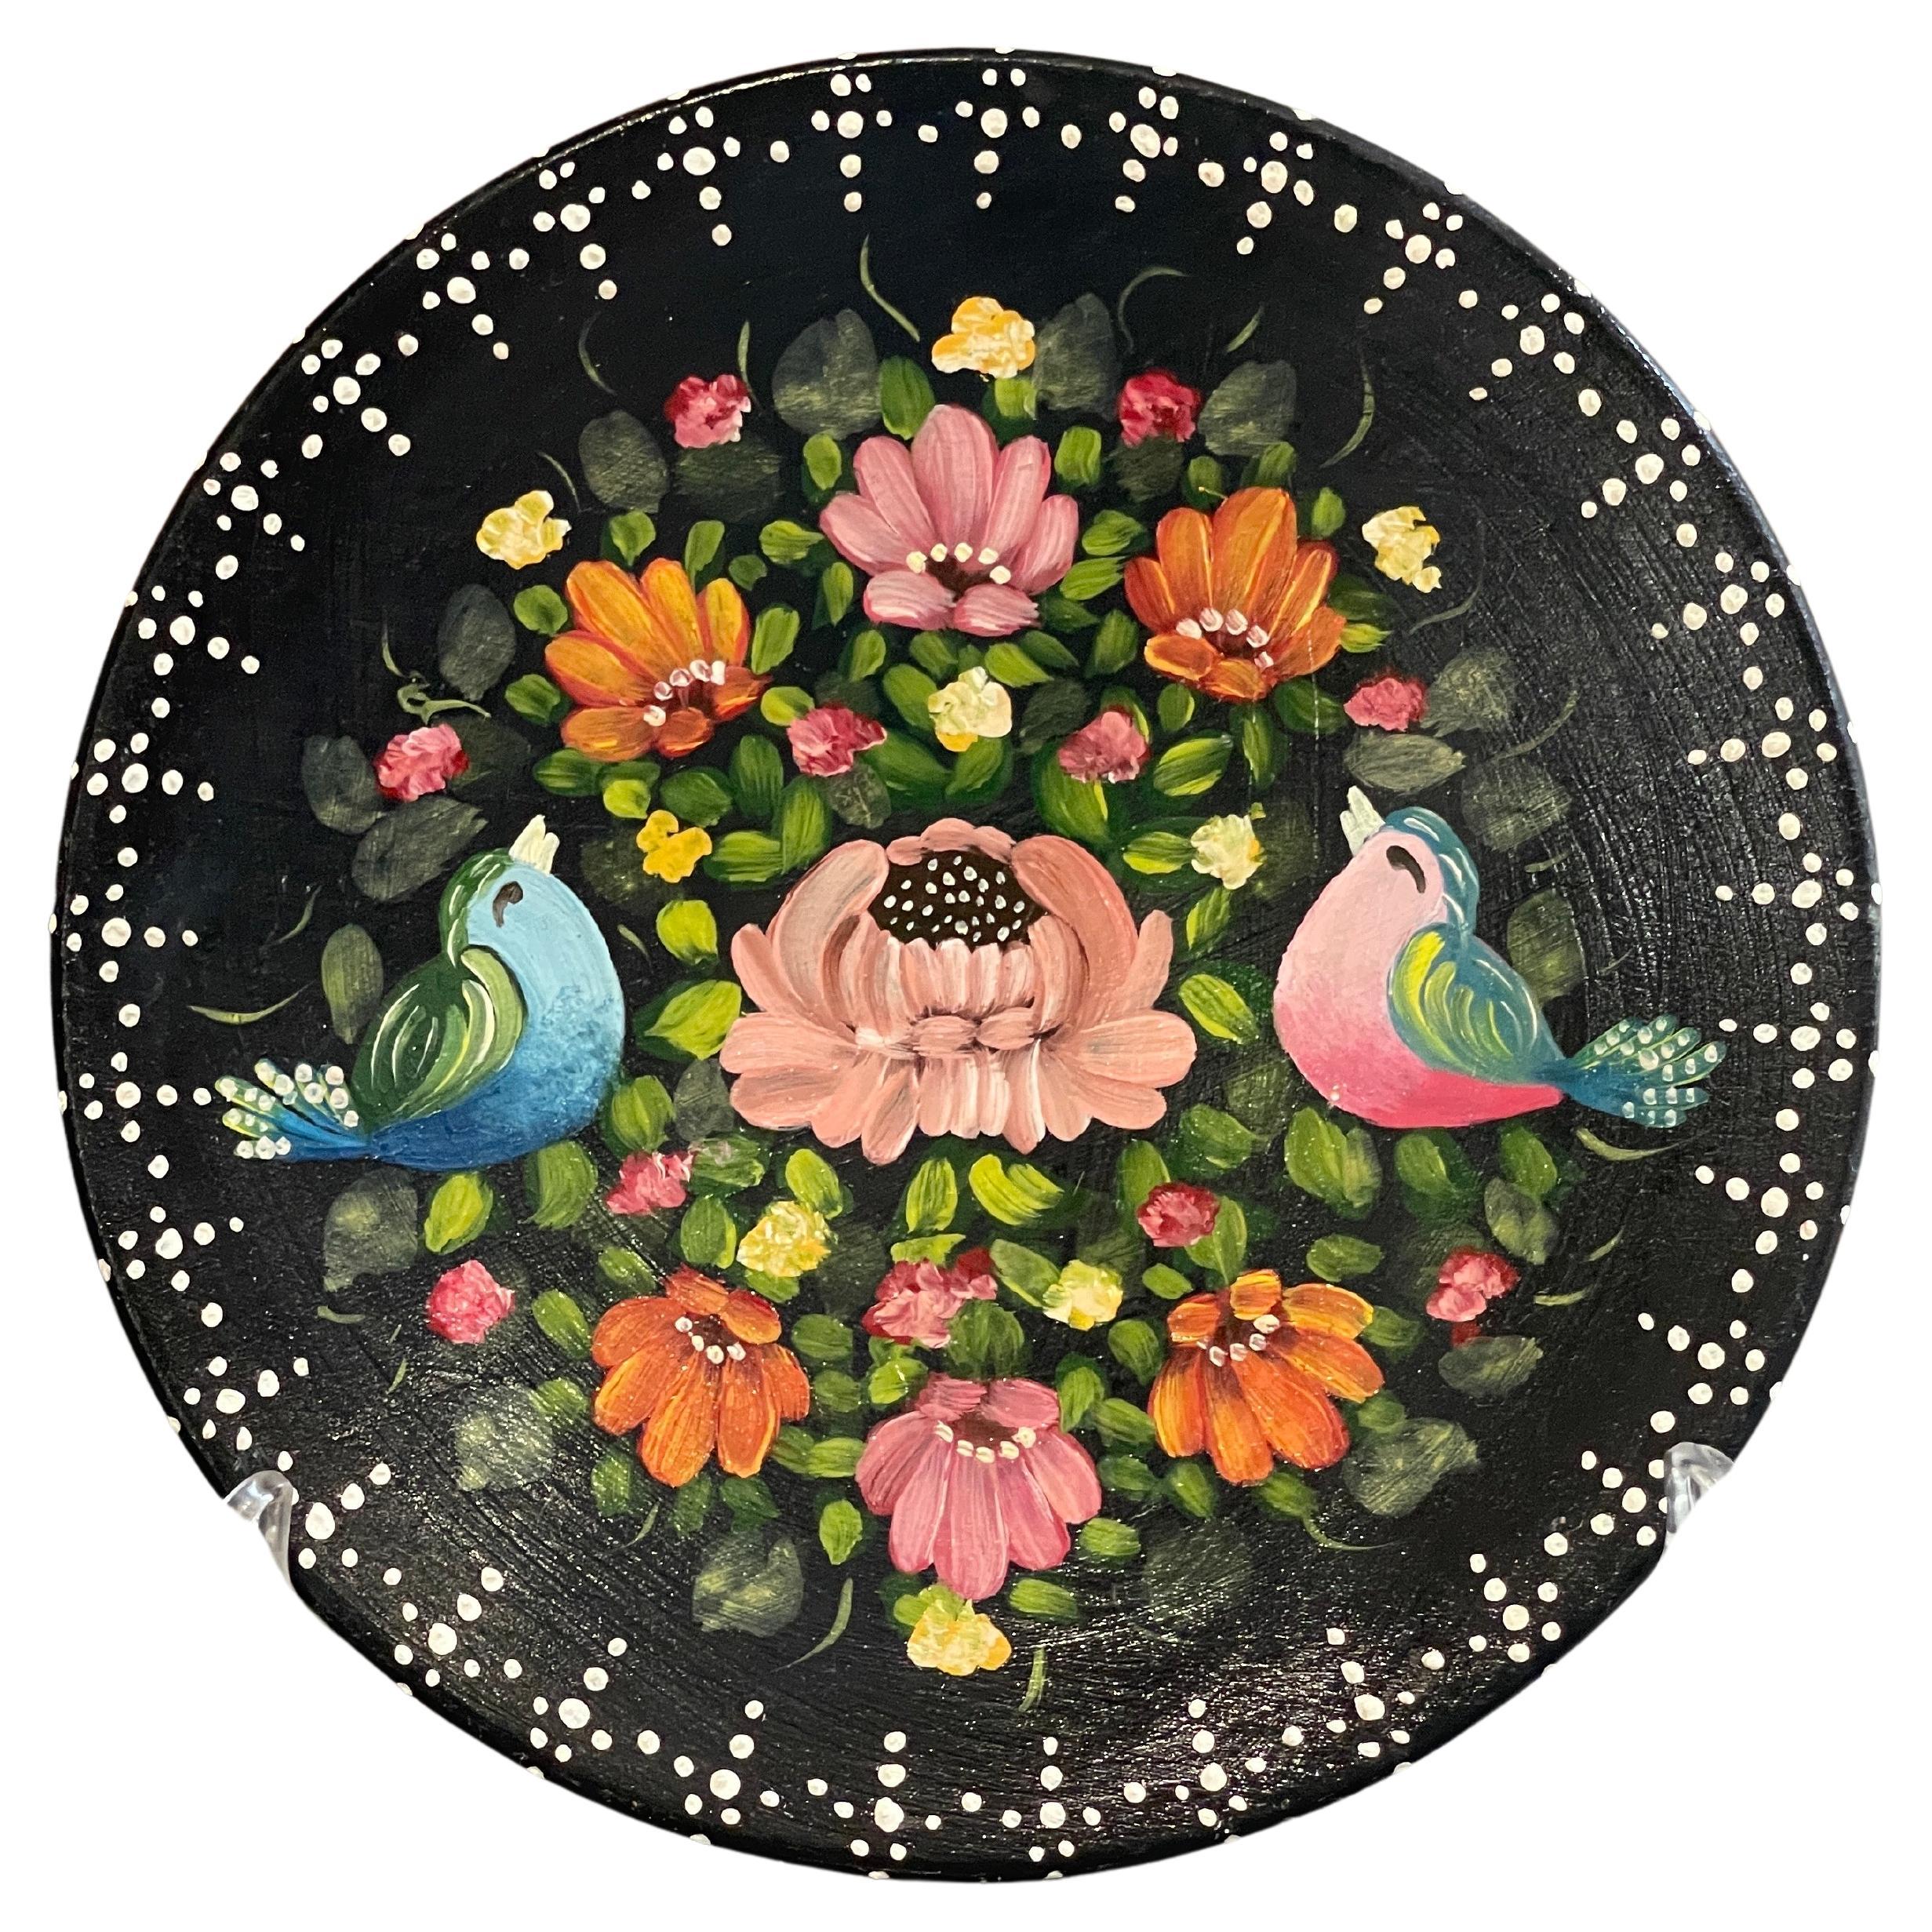 Vintage Hand Painted Plate, Decorative Ceramic Bird and Flower Wall Decoration For Sale